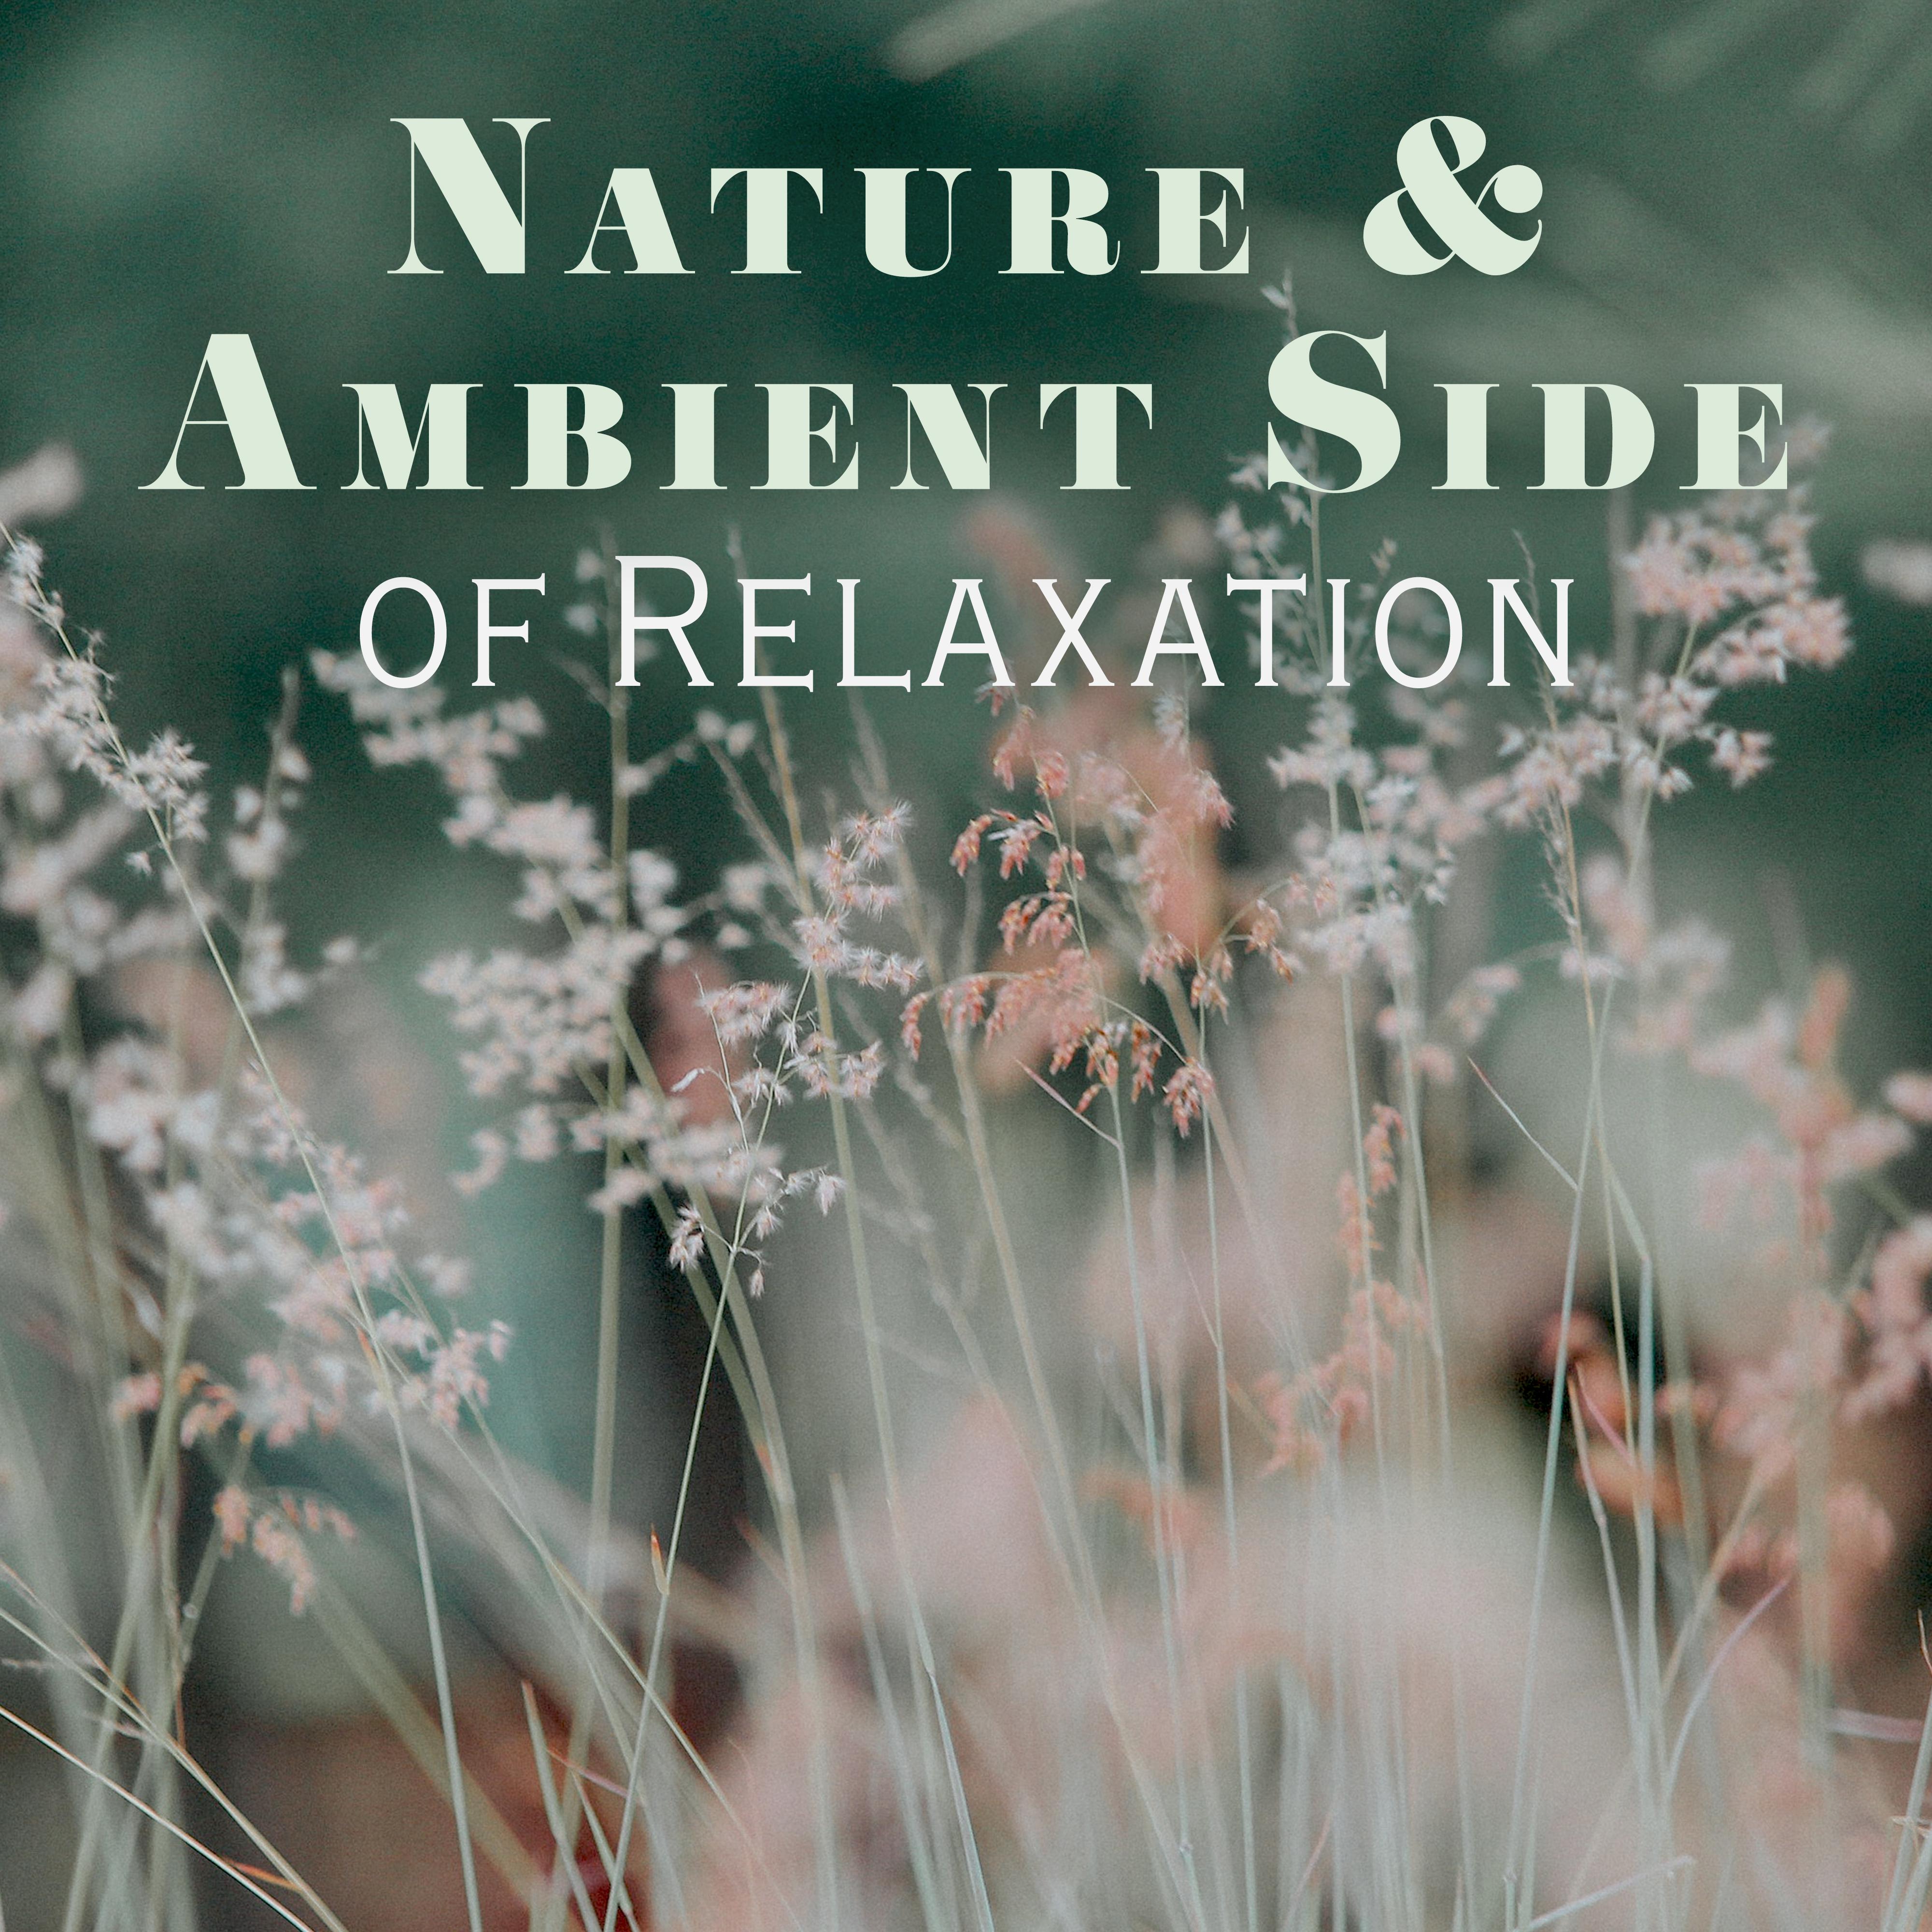 Nature & Ambient Side of Relaxation: New Age 2019 Music for Total Relax, Calming Ambient & Nature Sounds, Soothing Beautiful Piano Melodies